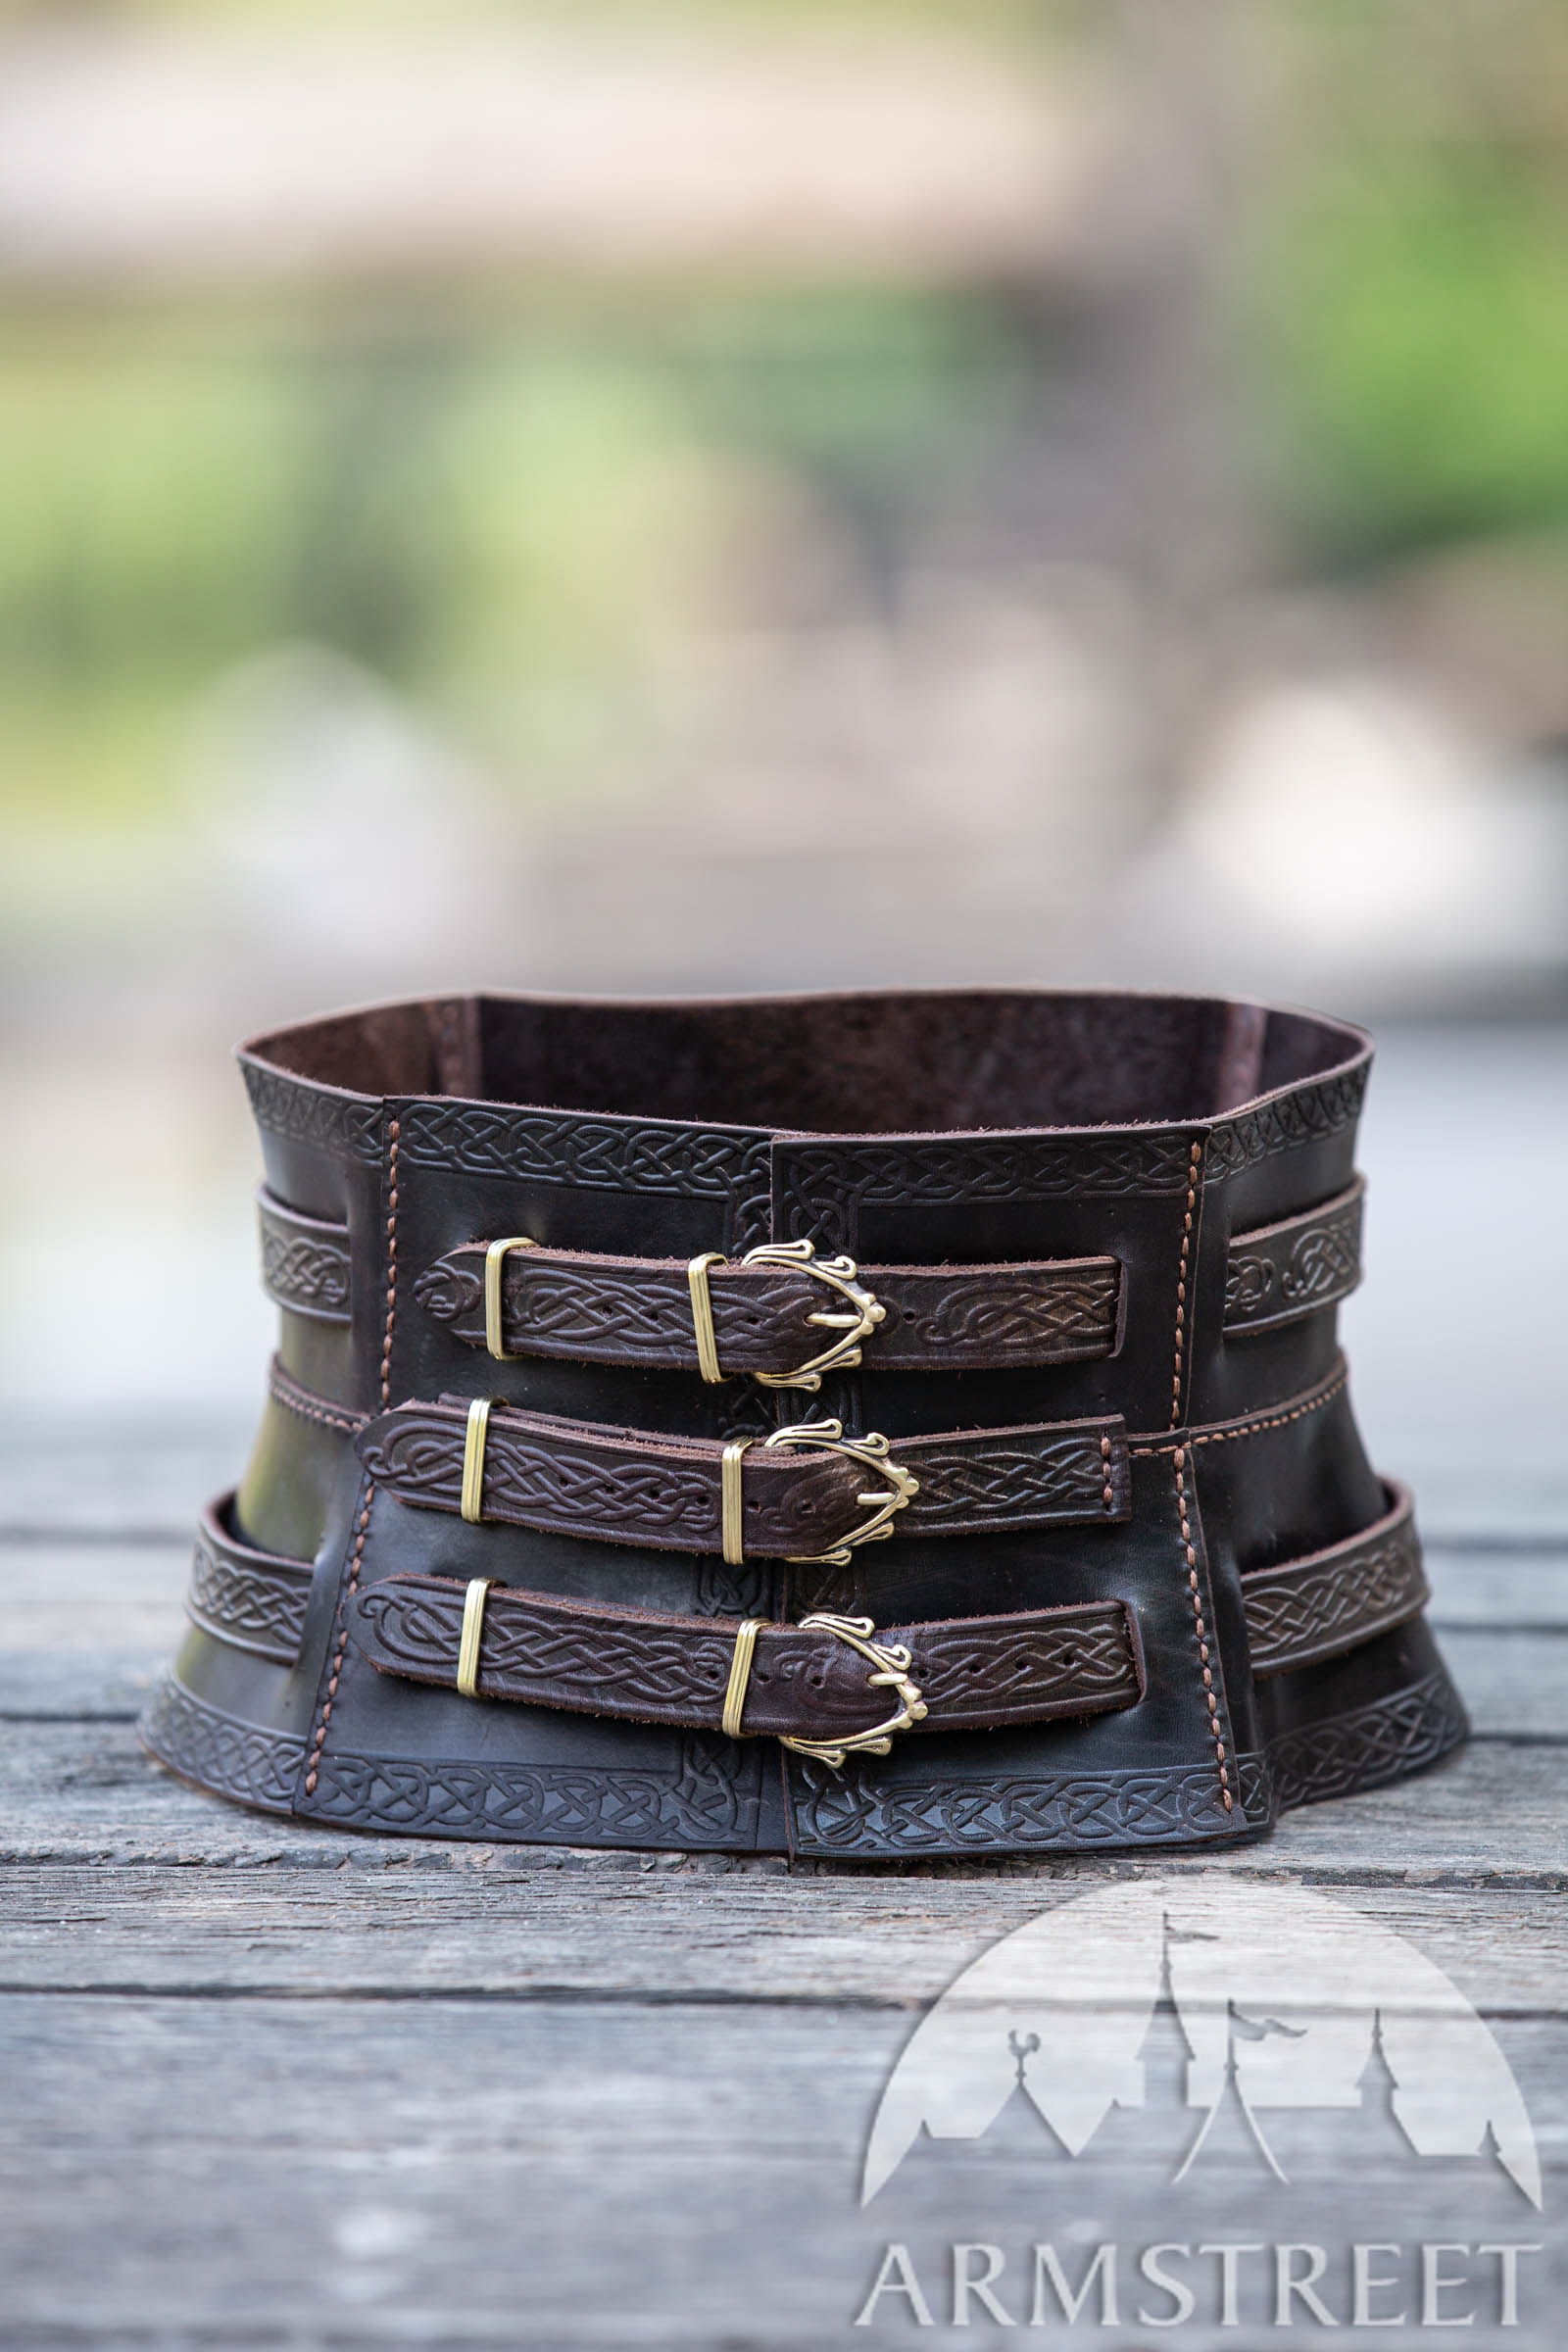 Viking War Corset Belt with Embossing “Gudrun the Wolfdottir” for sale.  Available in: brown leather, black leather, ivory leather :: by medieval  store ArmStreet